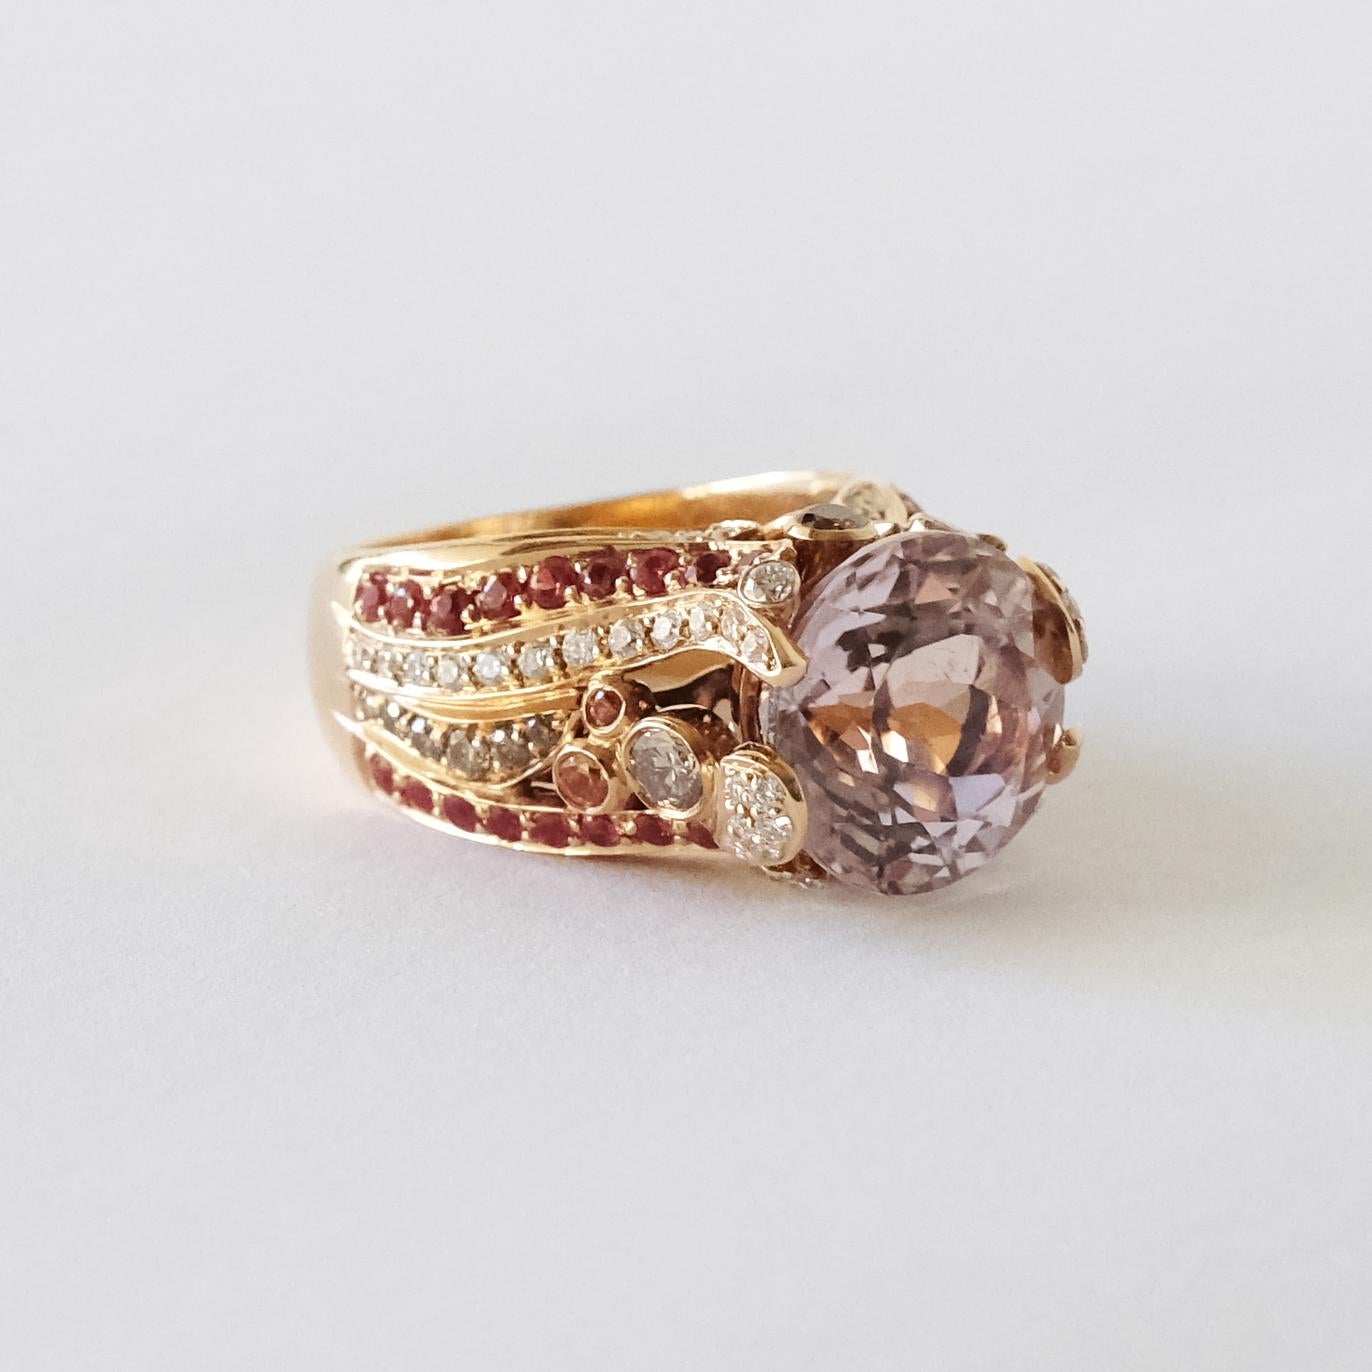 Crafted in pink 19.2K gold and set with a round kunzite, white diamonds, brown diamonds and orange sapphires, this flower cocktail ring has the perfect size and a romantic look. This piece is designed by Monseo and manufactured by Monseo artisans in